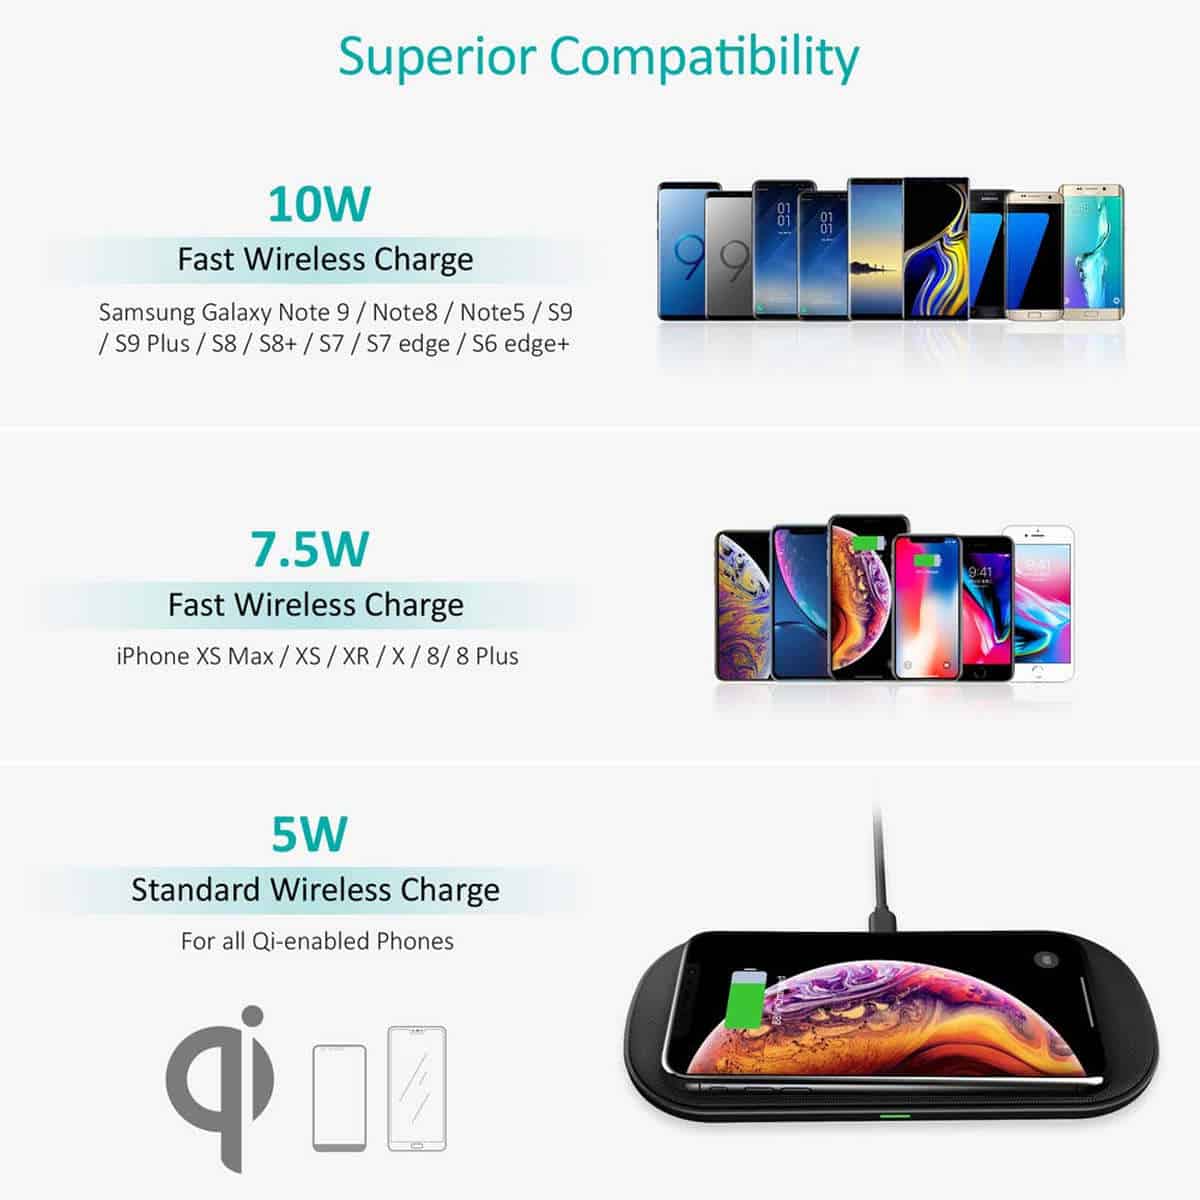 CHOETECH Dual Wireless ChargerSuperior compatibility | CHOETECH Qi Fast Dual Wireless Charging Pad | Product Review